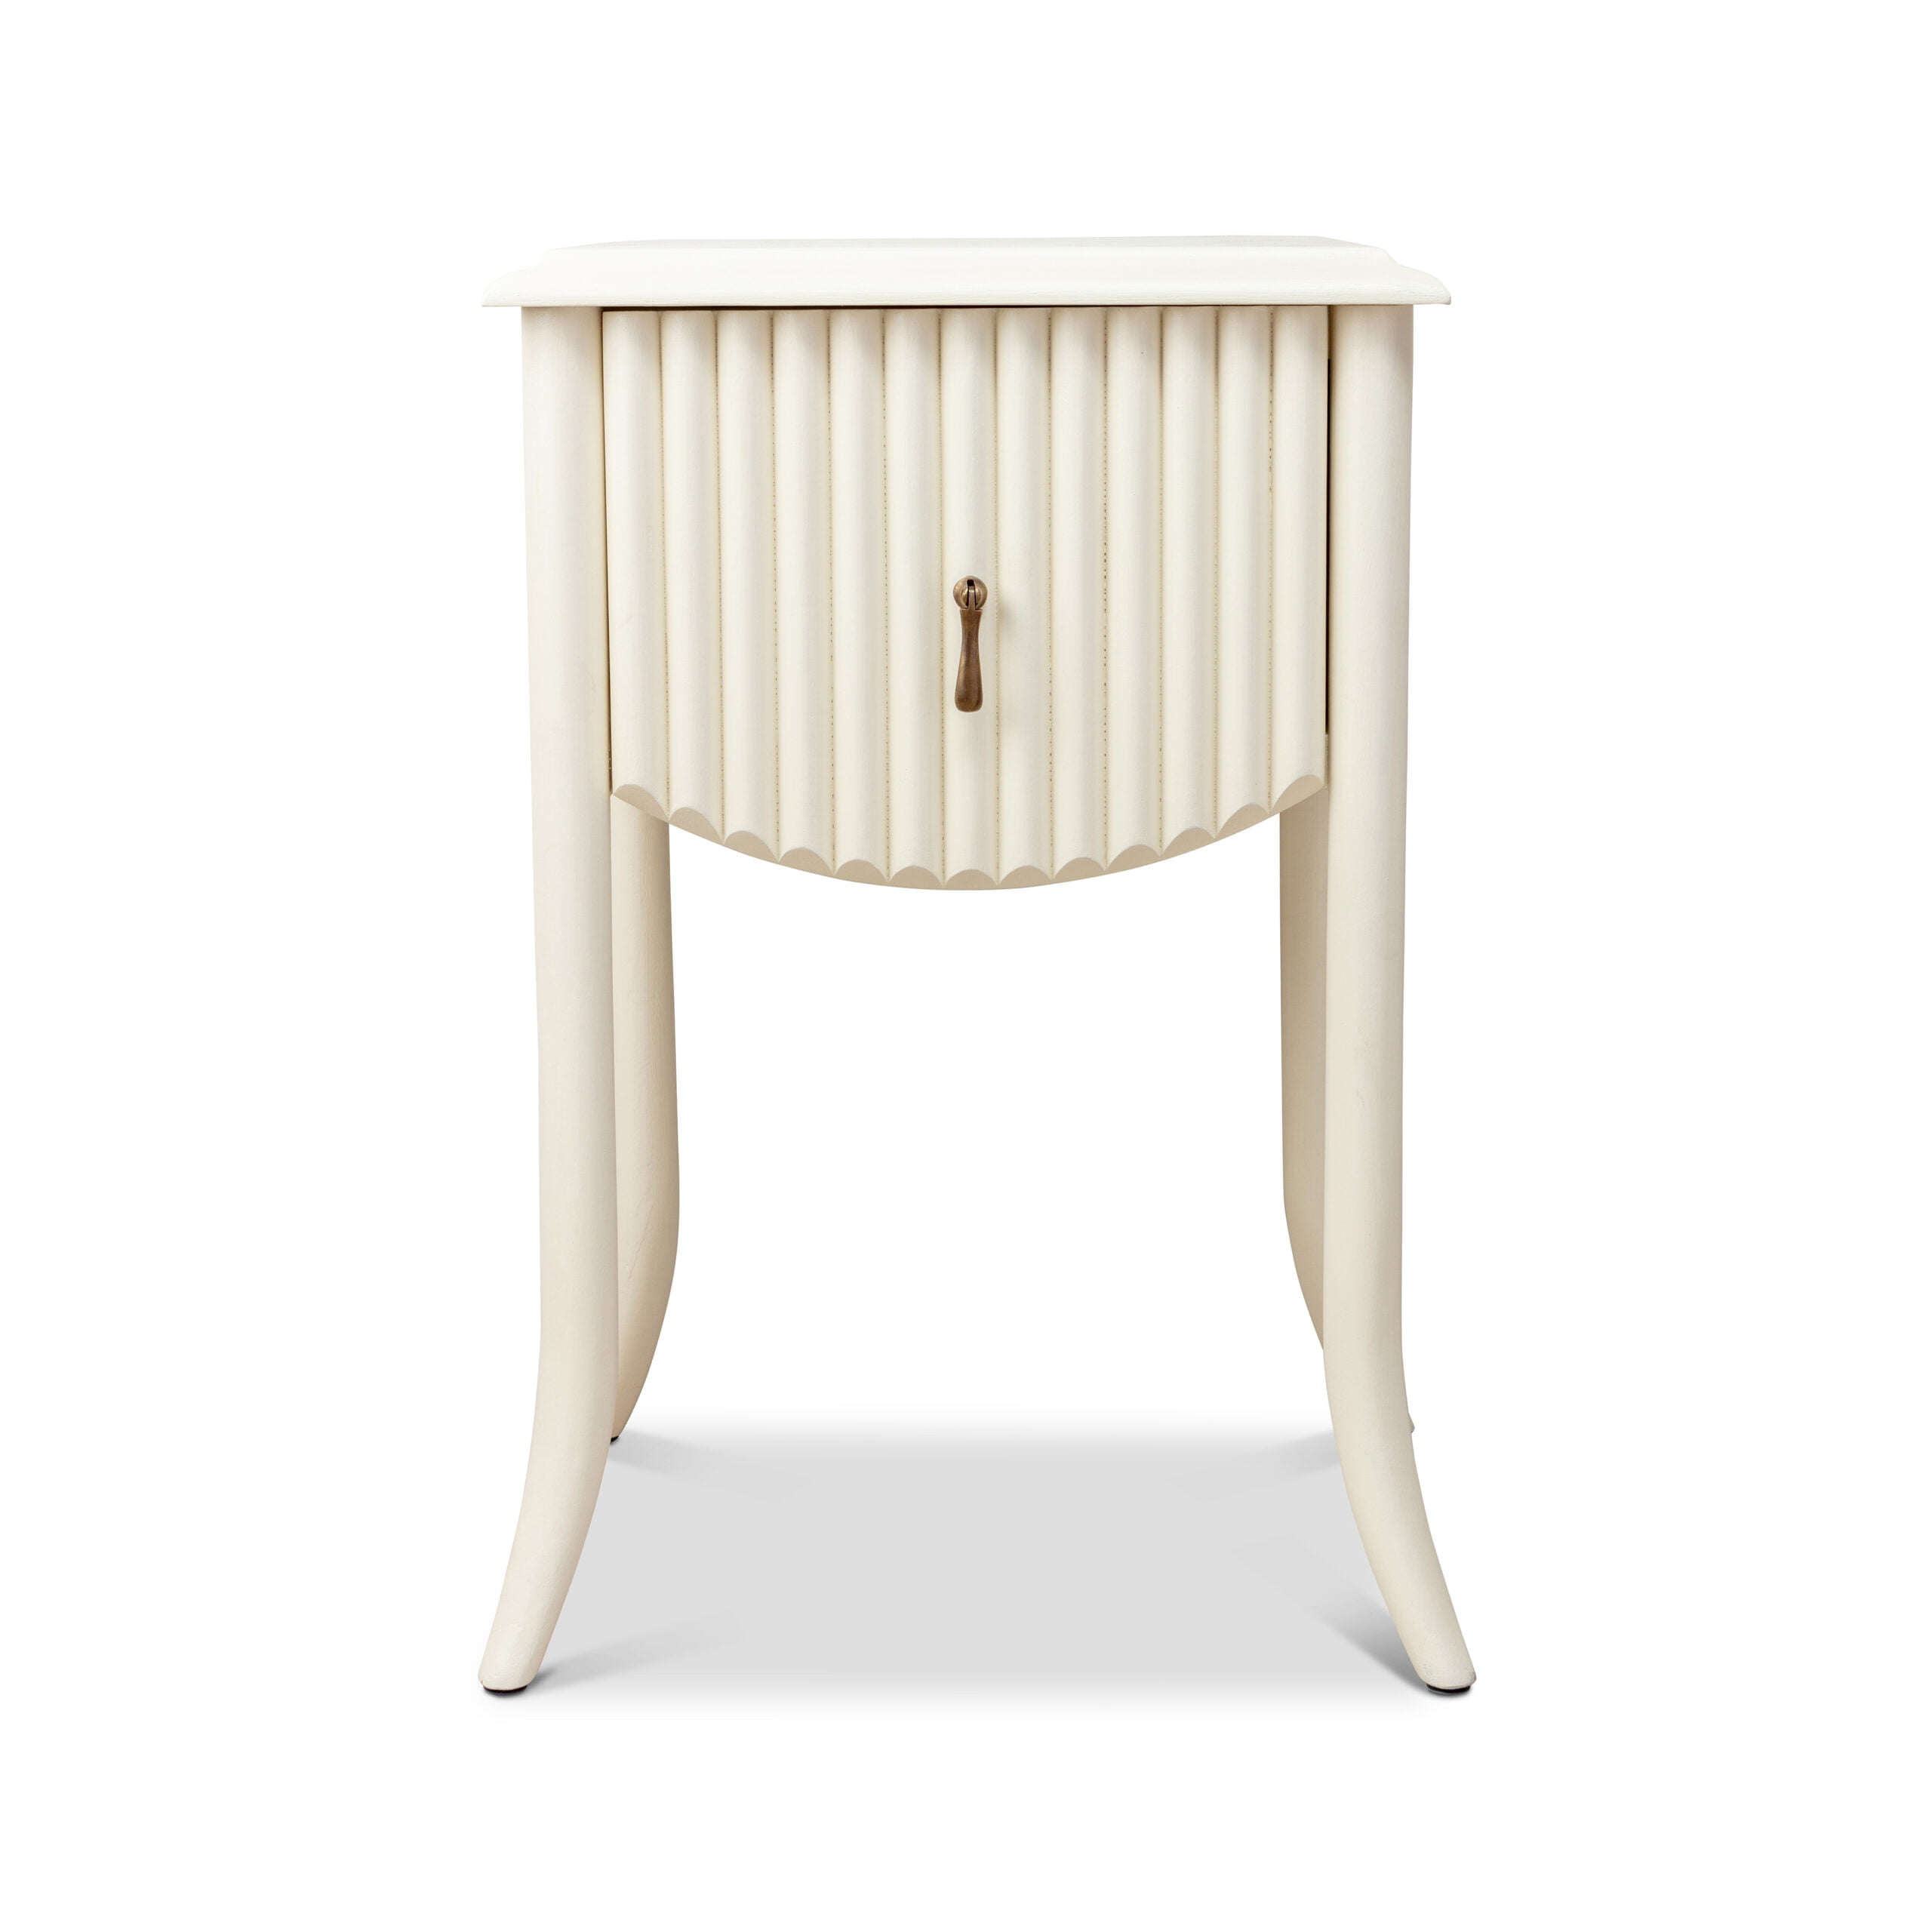 A petite white, bamboo-style wooden bedside table with a pull handle.